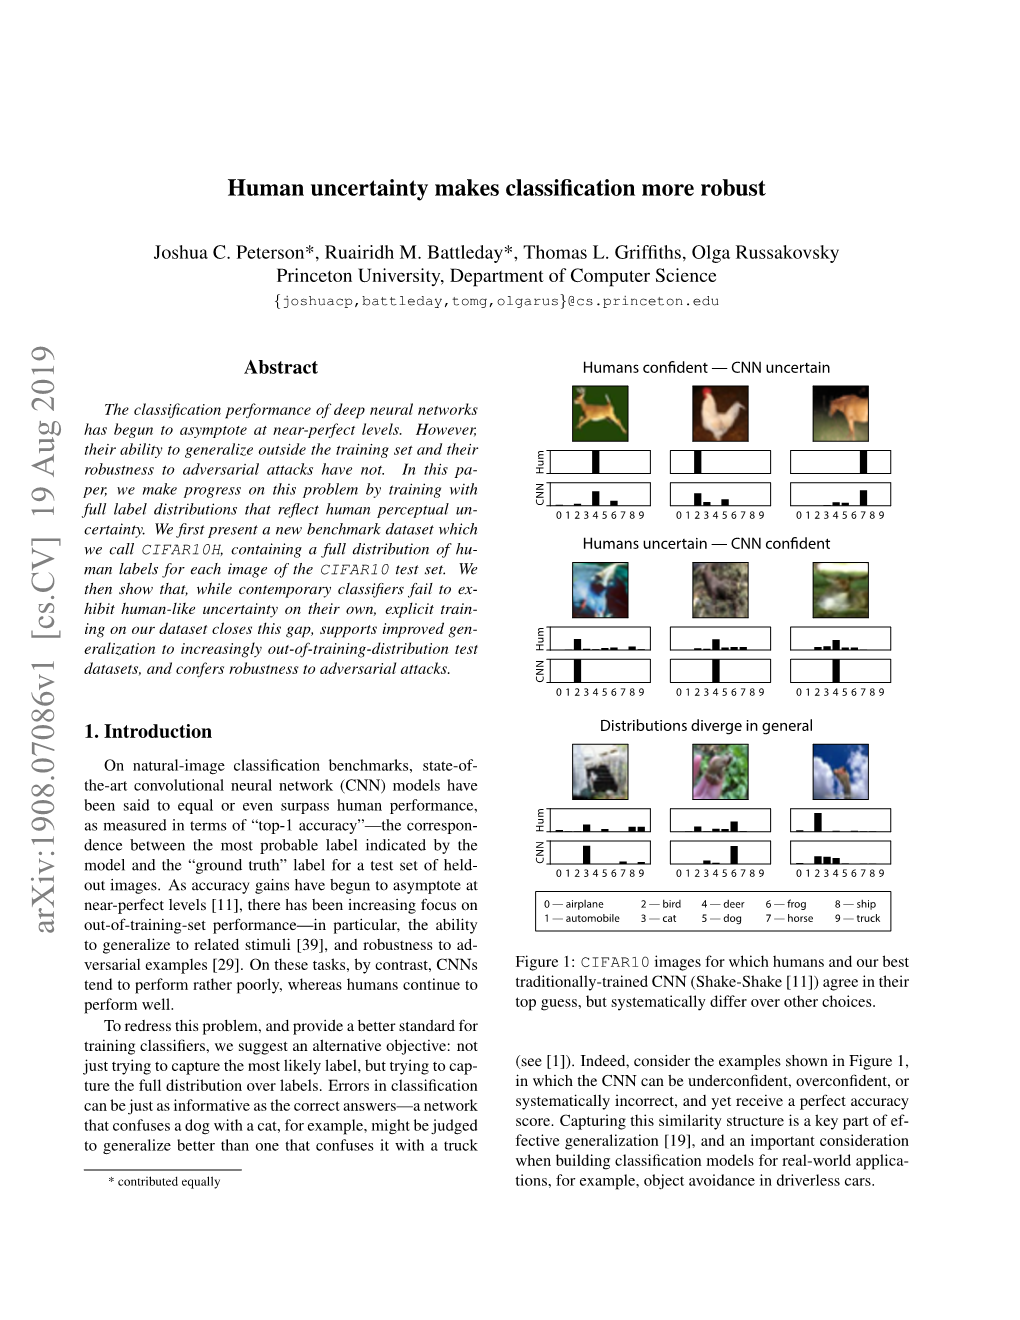 Arxiv:1908.07086V1 [Cs.CV] 19 Aug 2019 to Generalize to Related Stimuli [39], and Robustness to Ad- Versarial Examples [29]